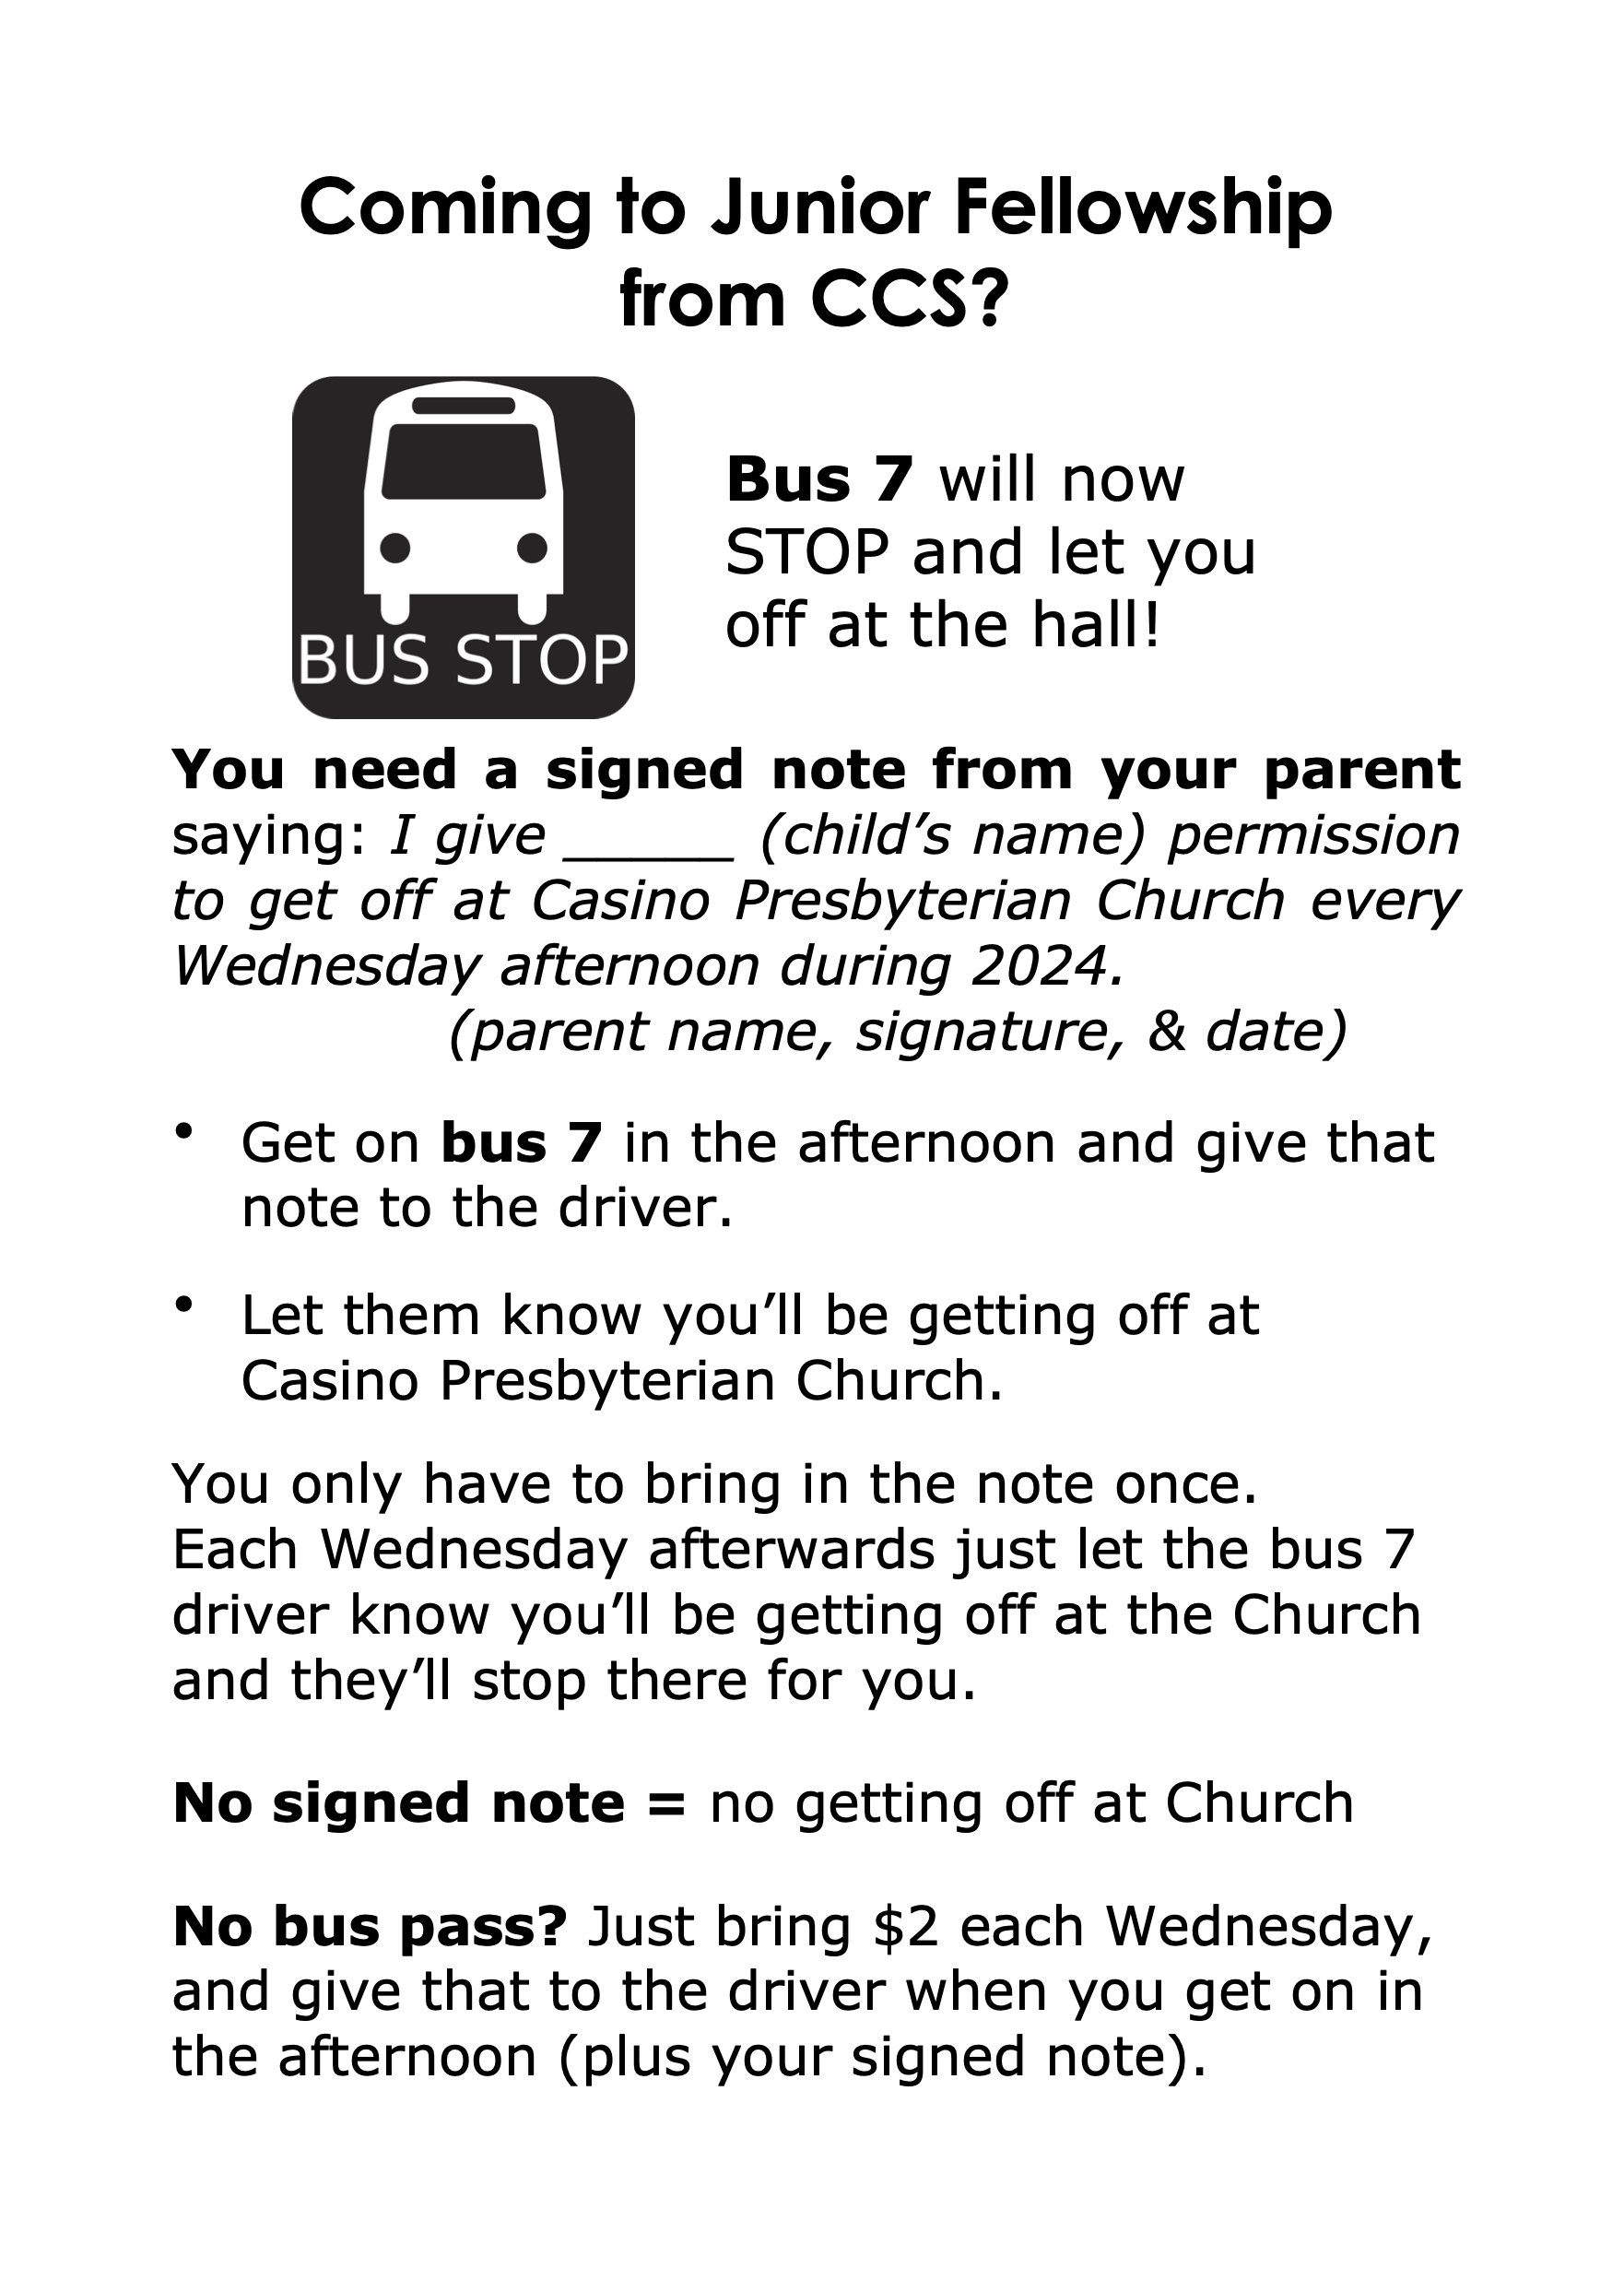 Bus note flyer 2024 1